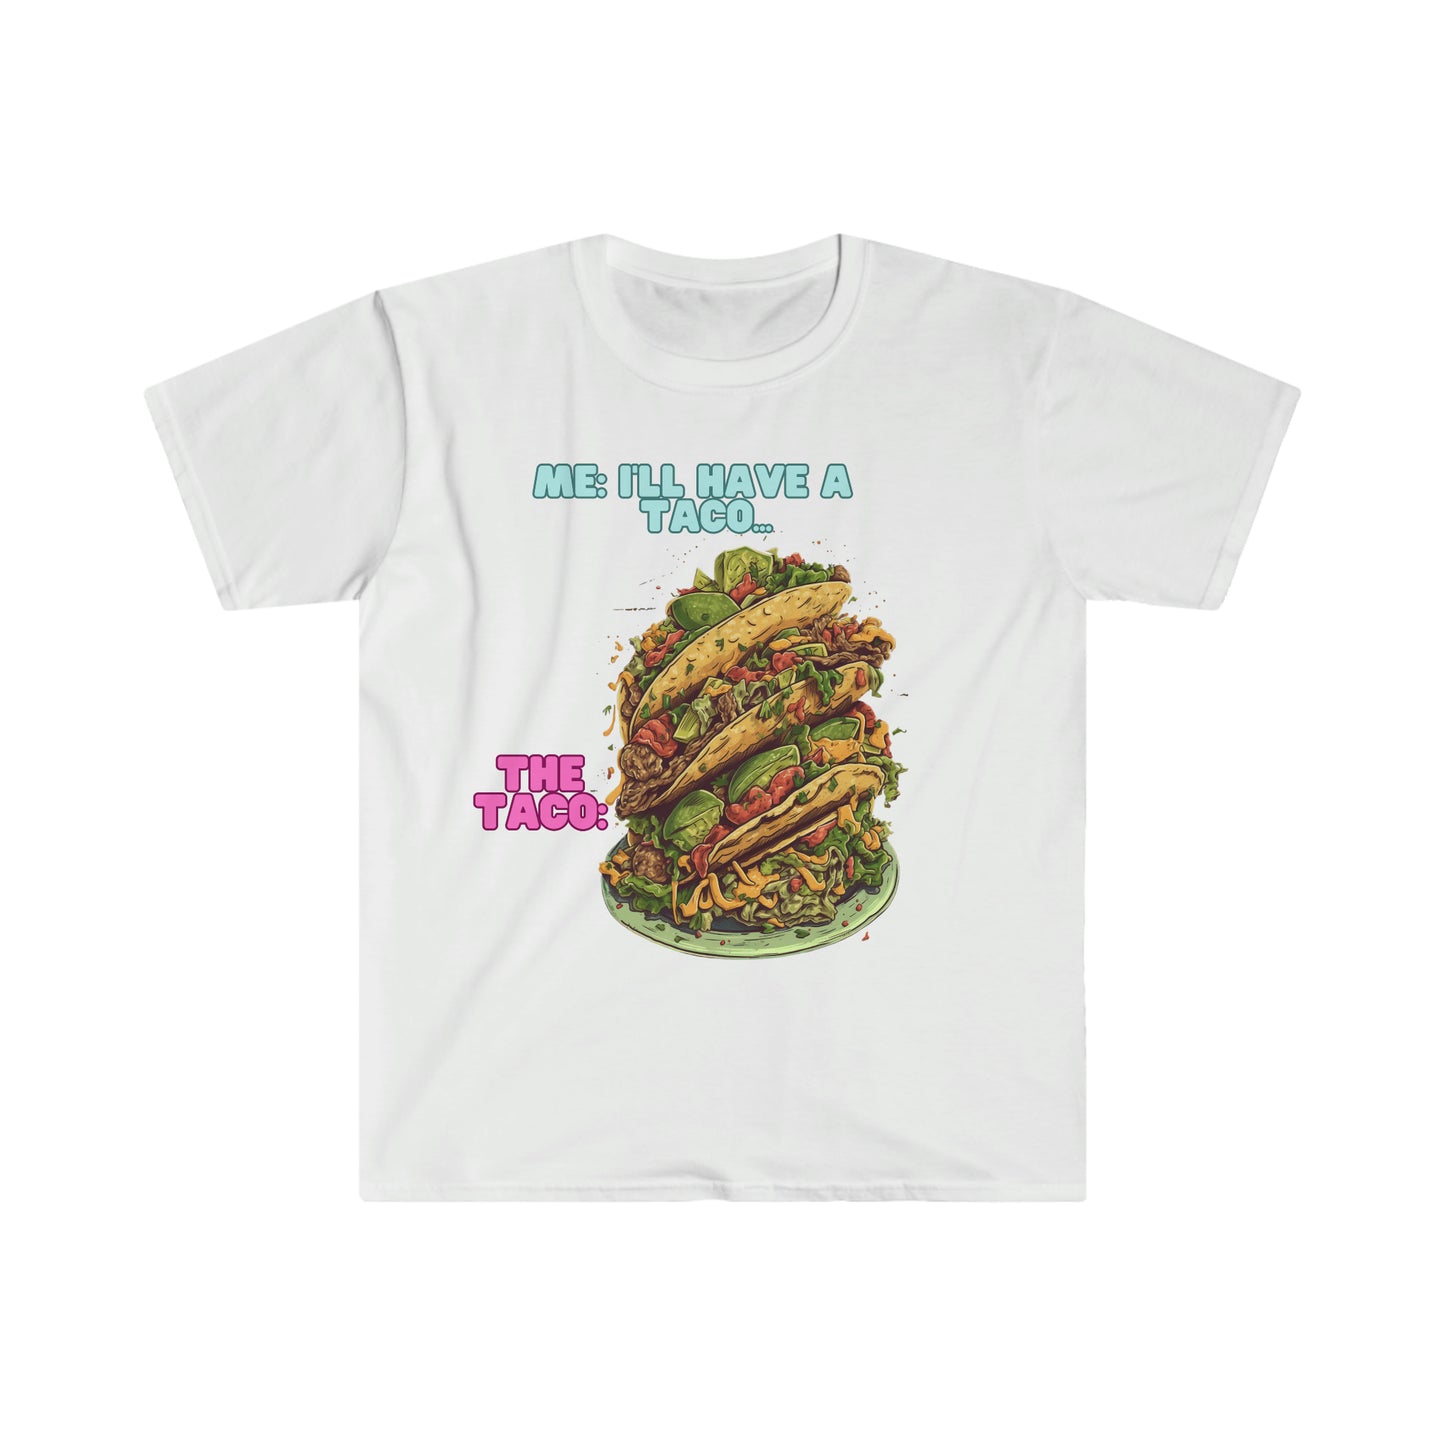 Have a Taco - Unisex Softstyle T-Shirt